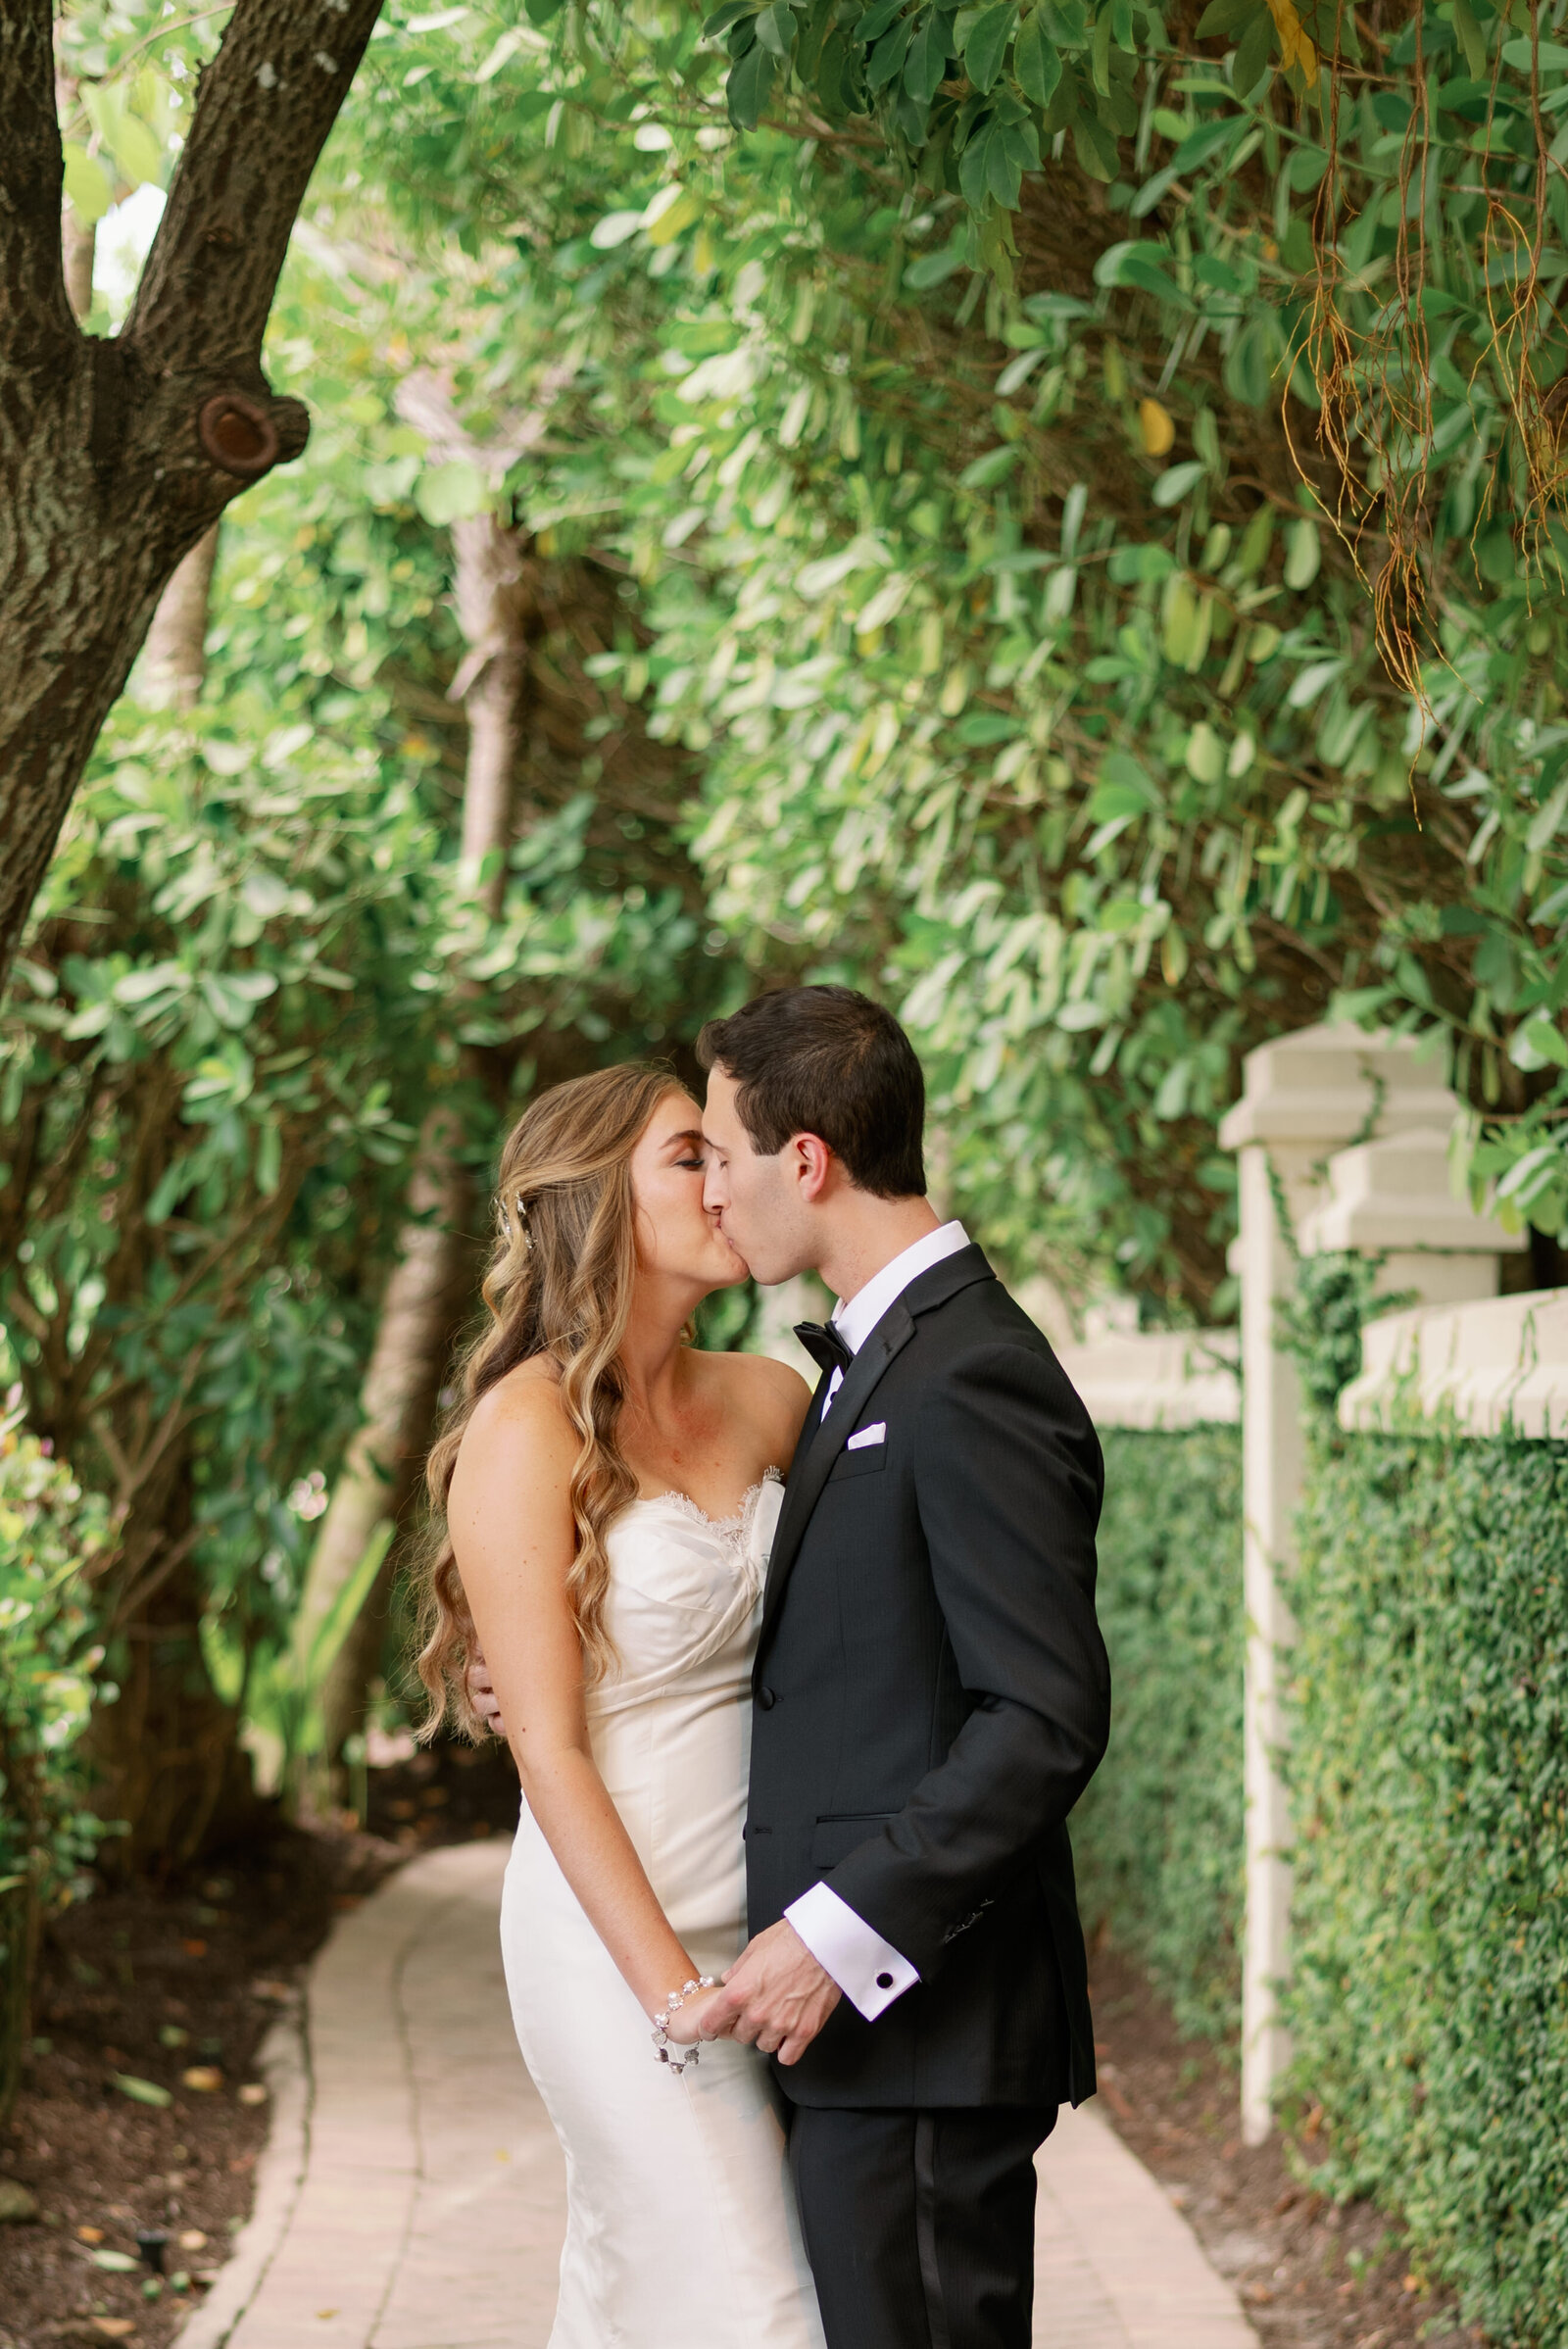 Bride and groom kissing and holding hands low on a secluded walkway